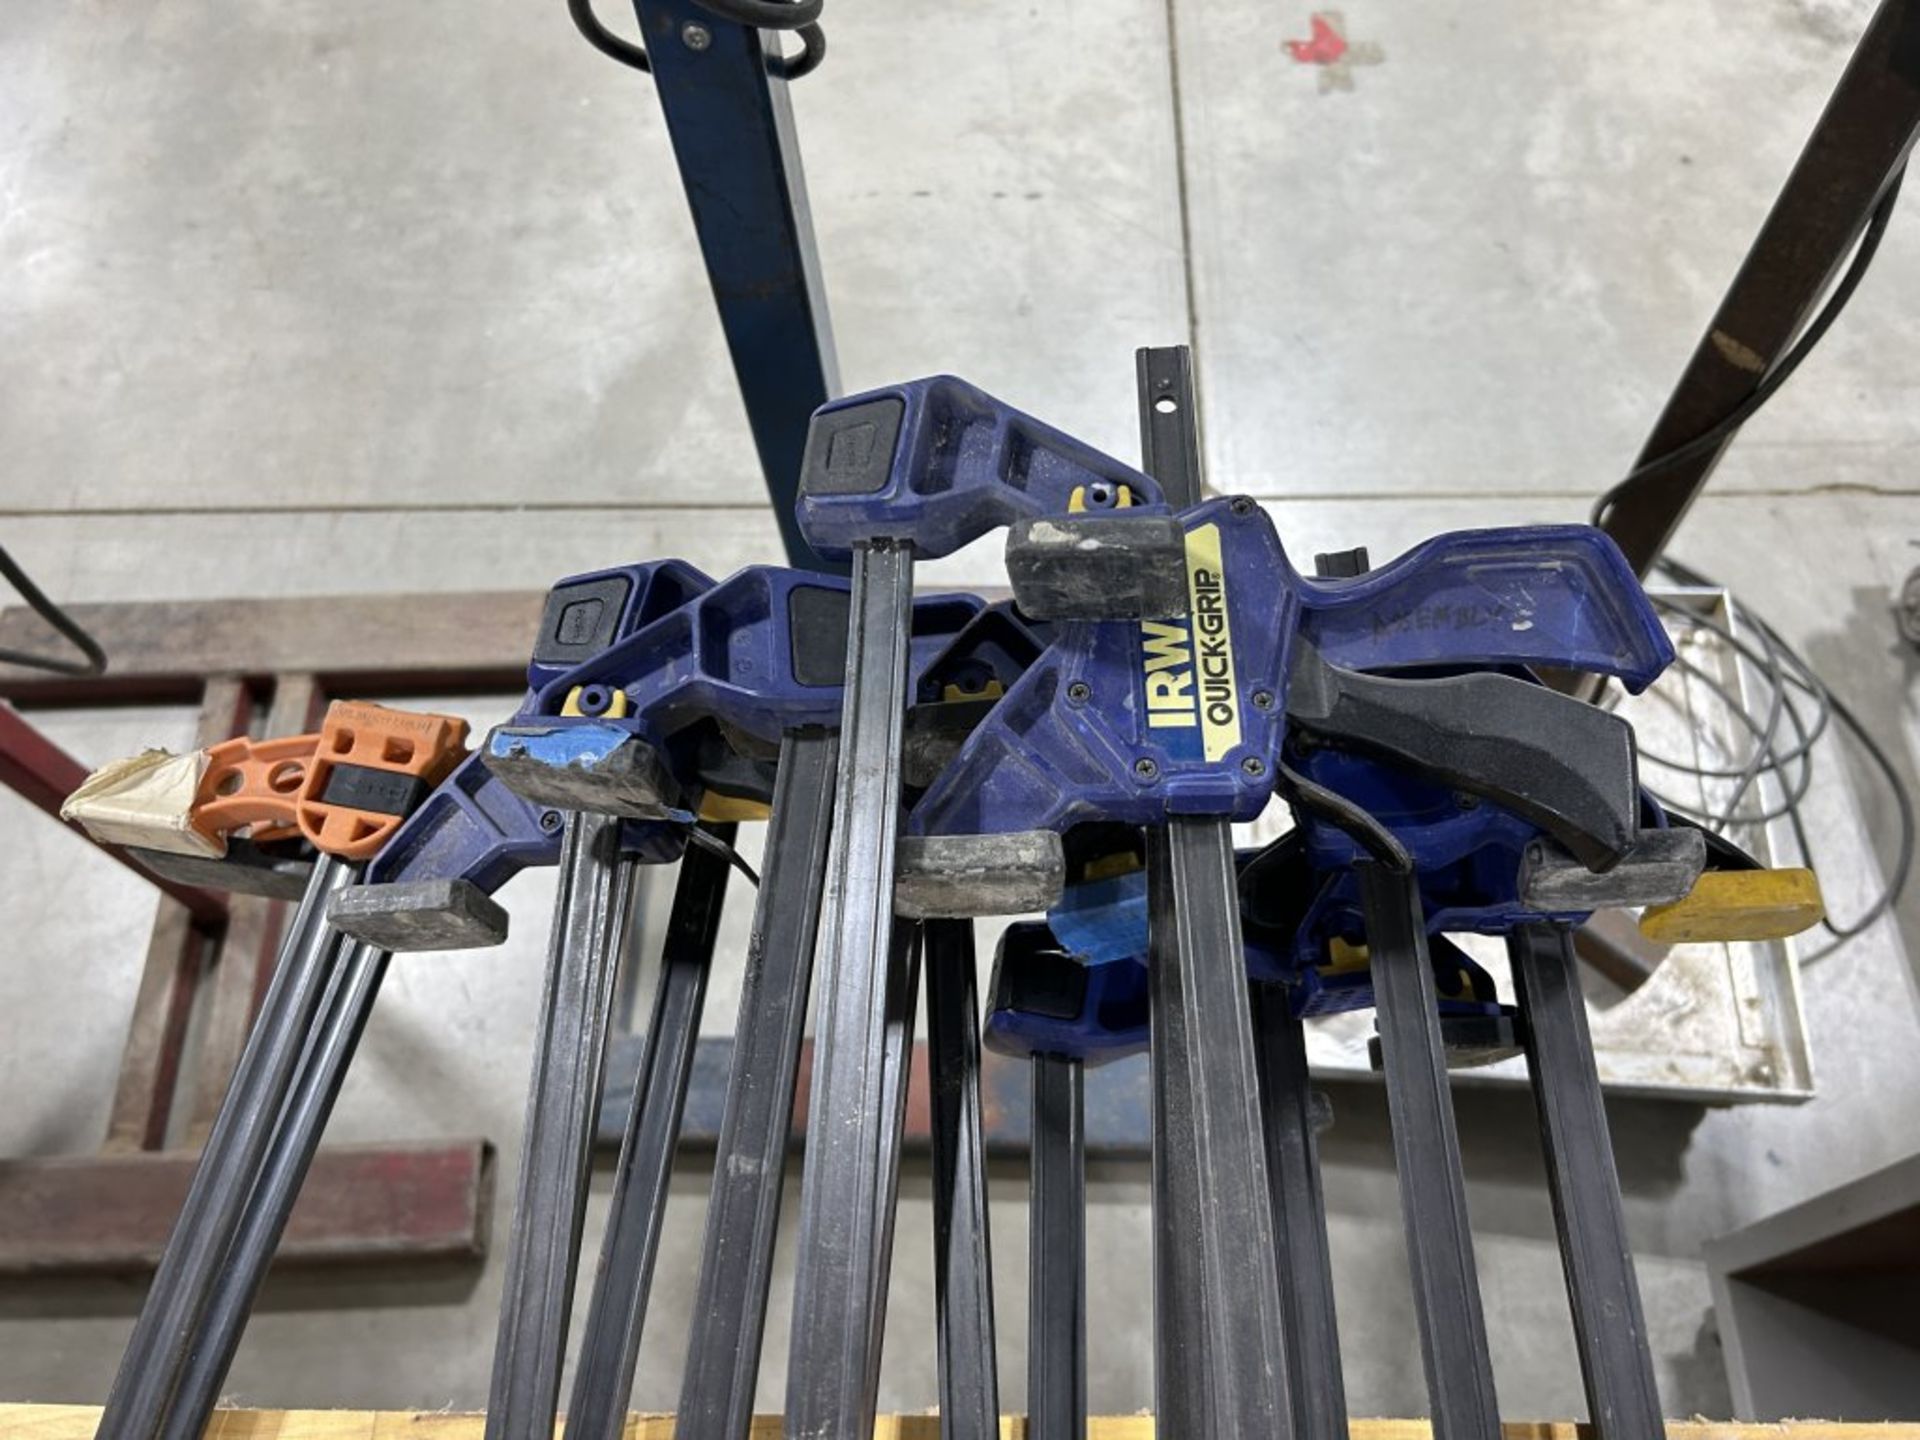 (15) LARGE 36'' QUICK GRIP CLAMPS, 13 ARE IRWIN BRAND, 2 ARE JORGENSEN BRAND - Image 4 of 4